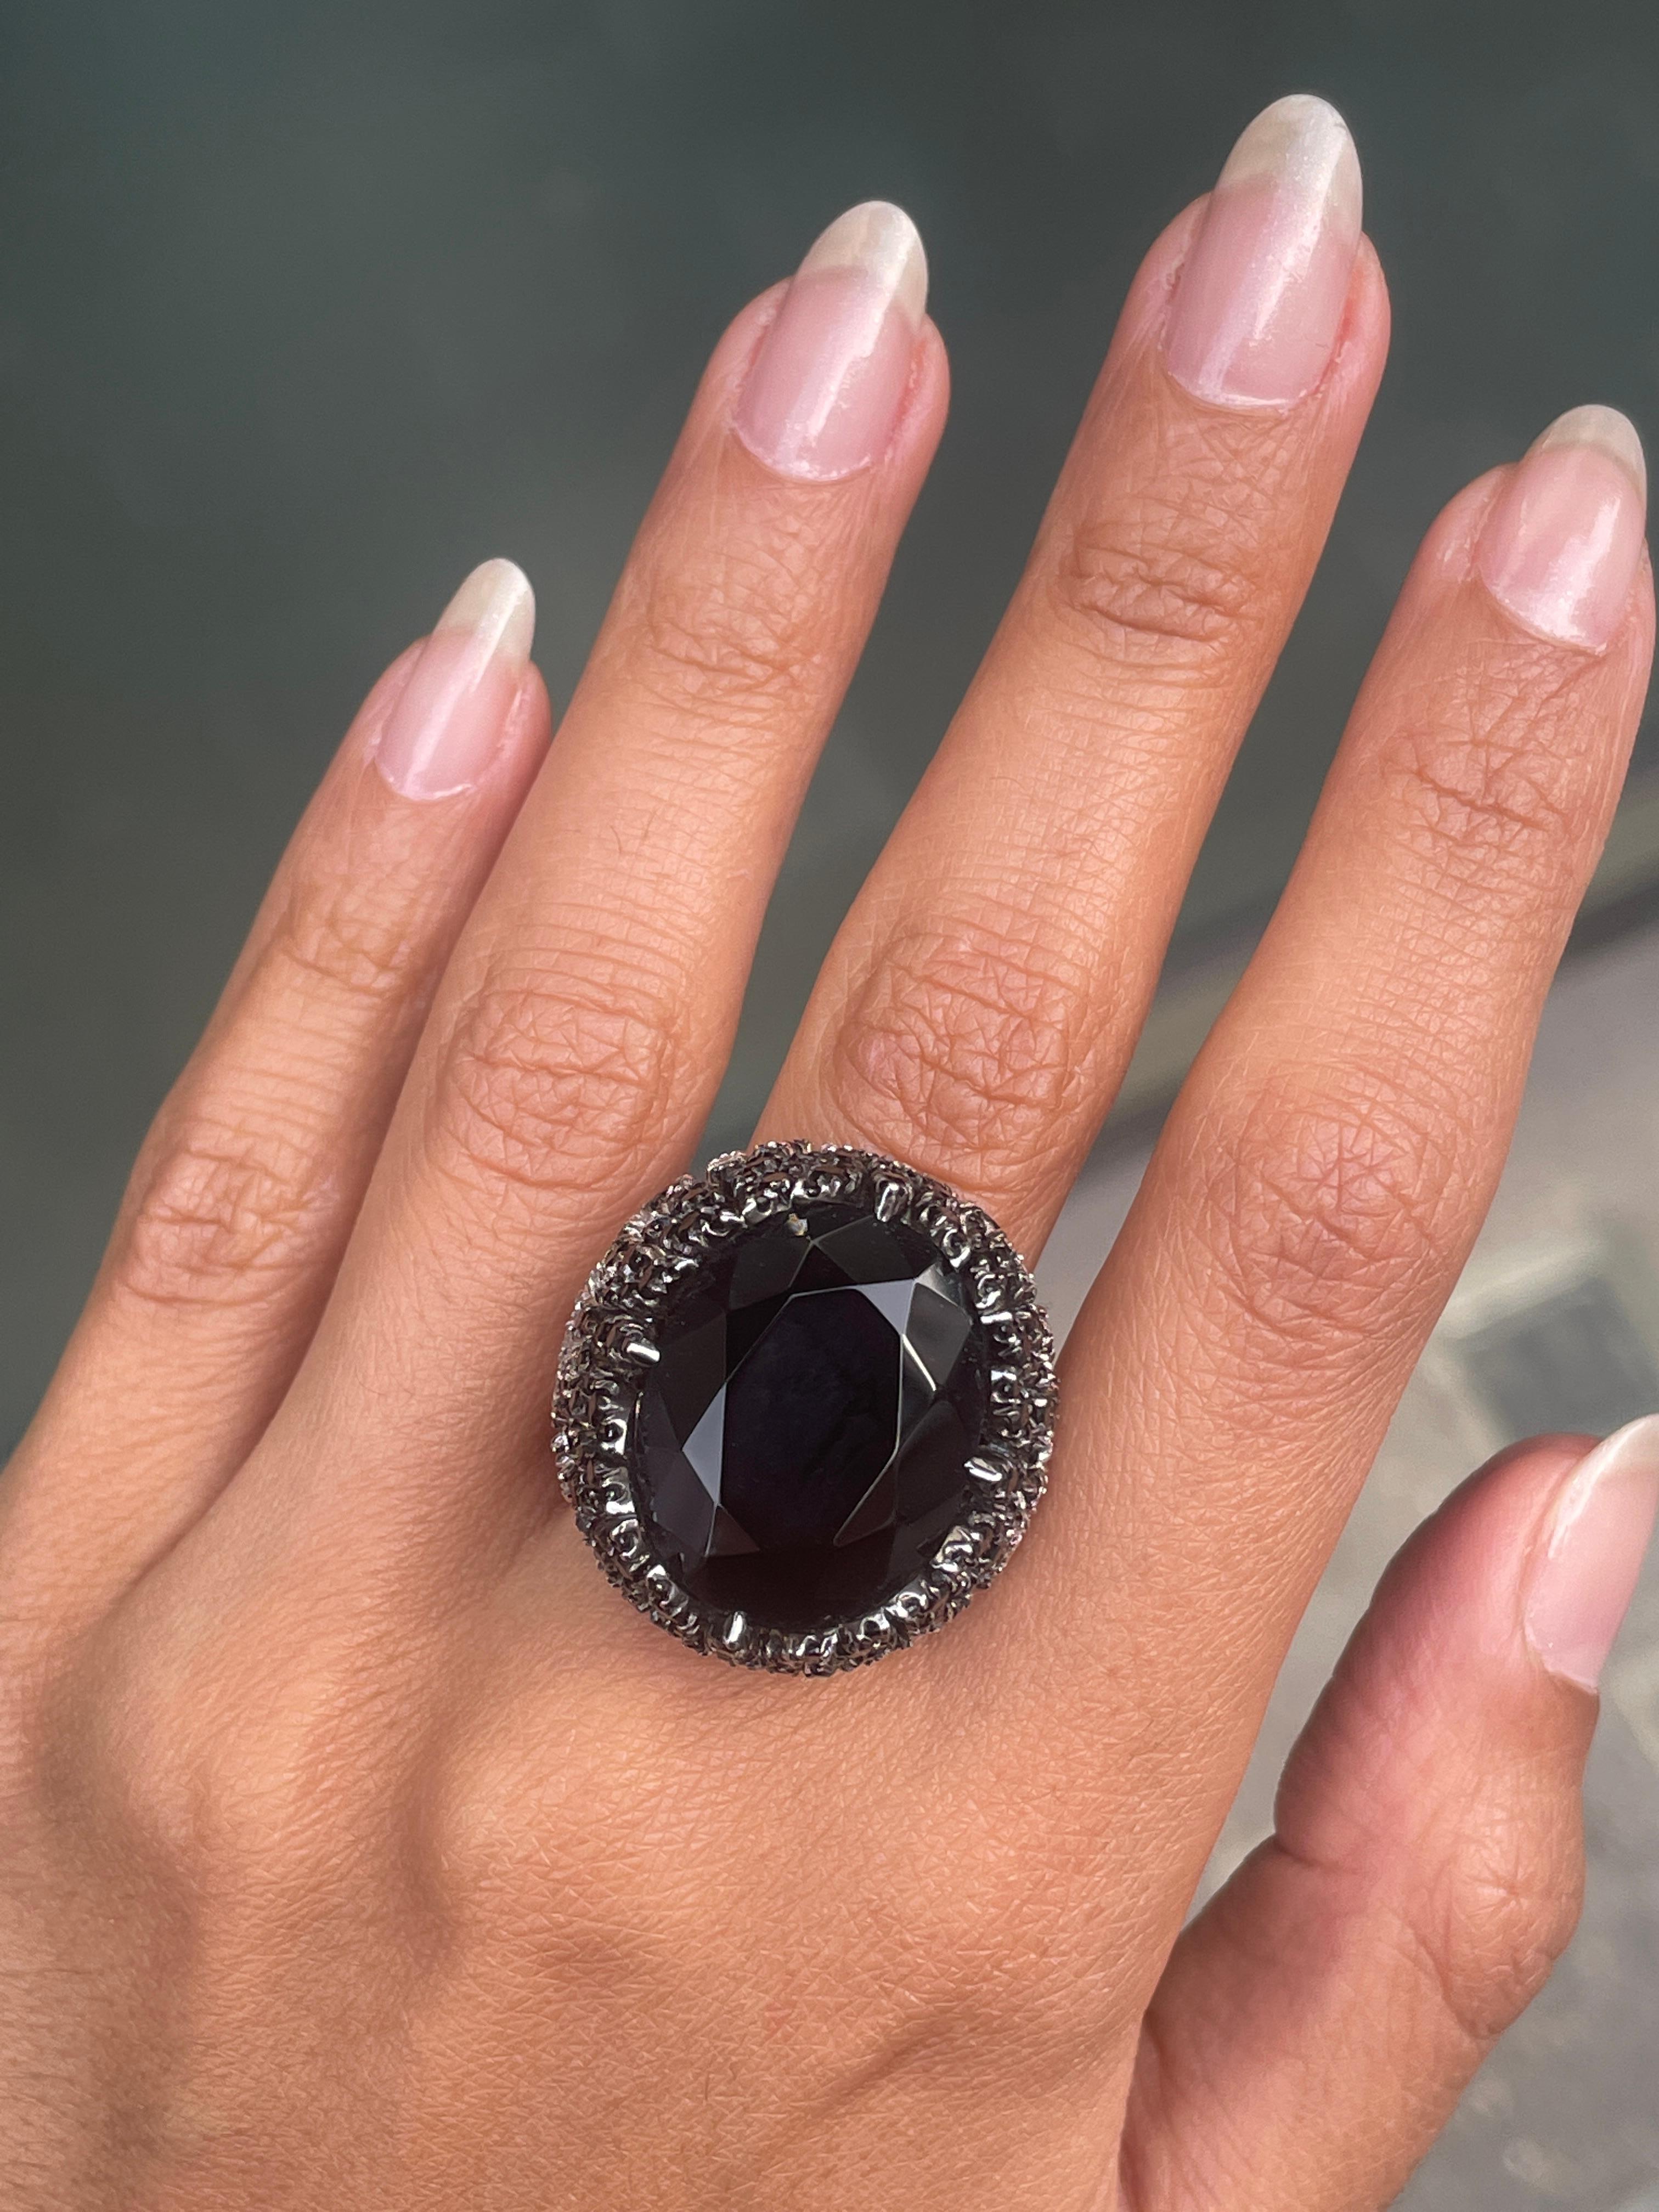 Pasquale Bruni 'Ghirlanda' Onyx, Black Spinel and Diamond 18K White Gold Ring In Excellent Condition For Sale In London, GB